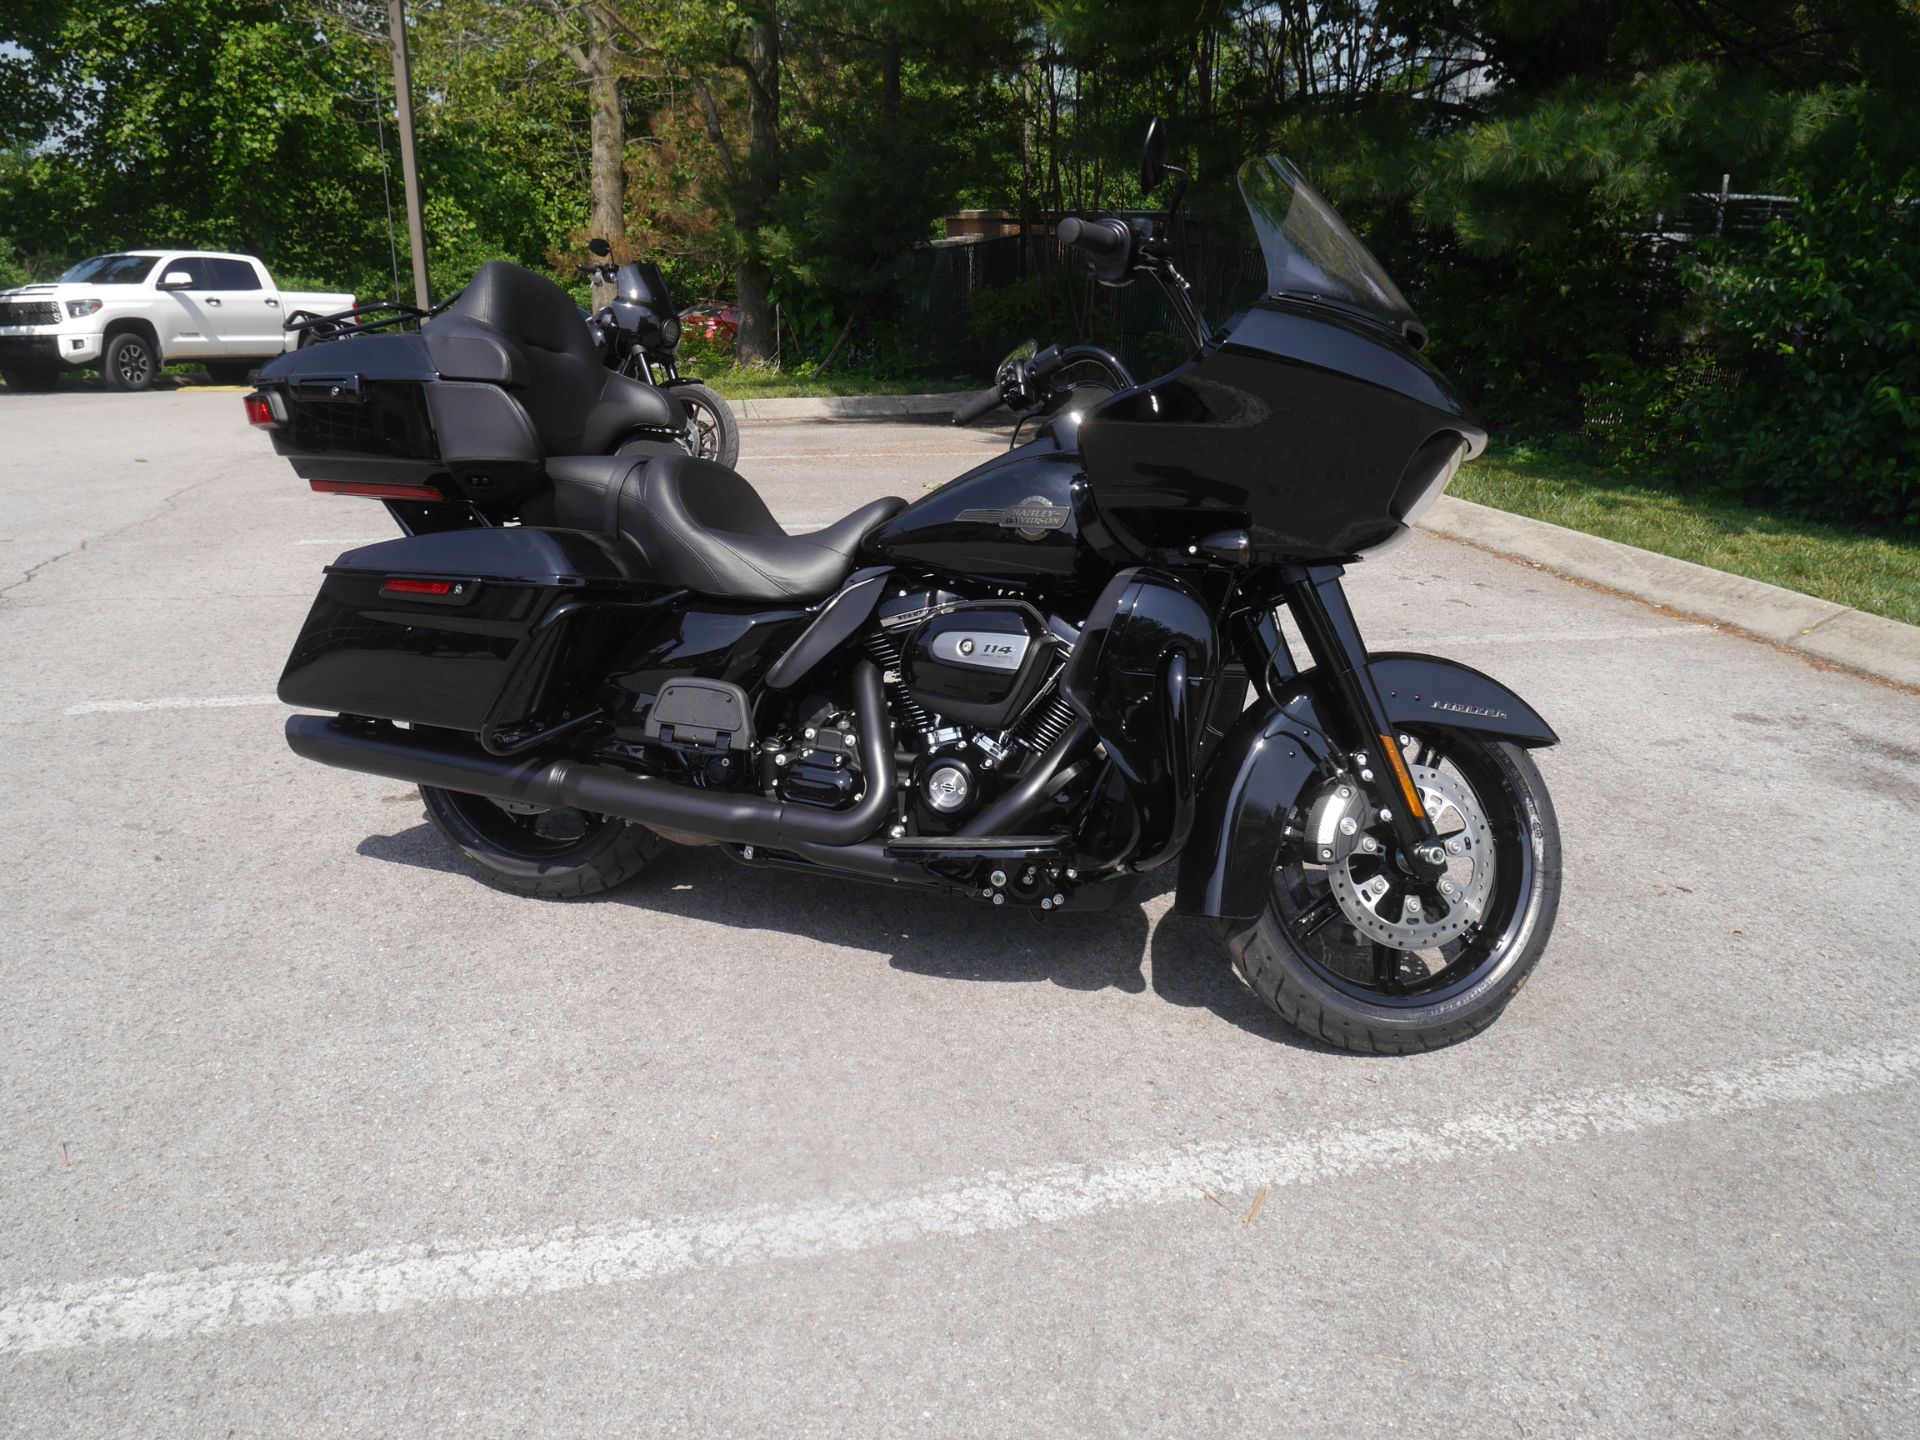 2023 Harley-Davidson Road Glide® Limited in Franklin, Tennessee - Photo 6